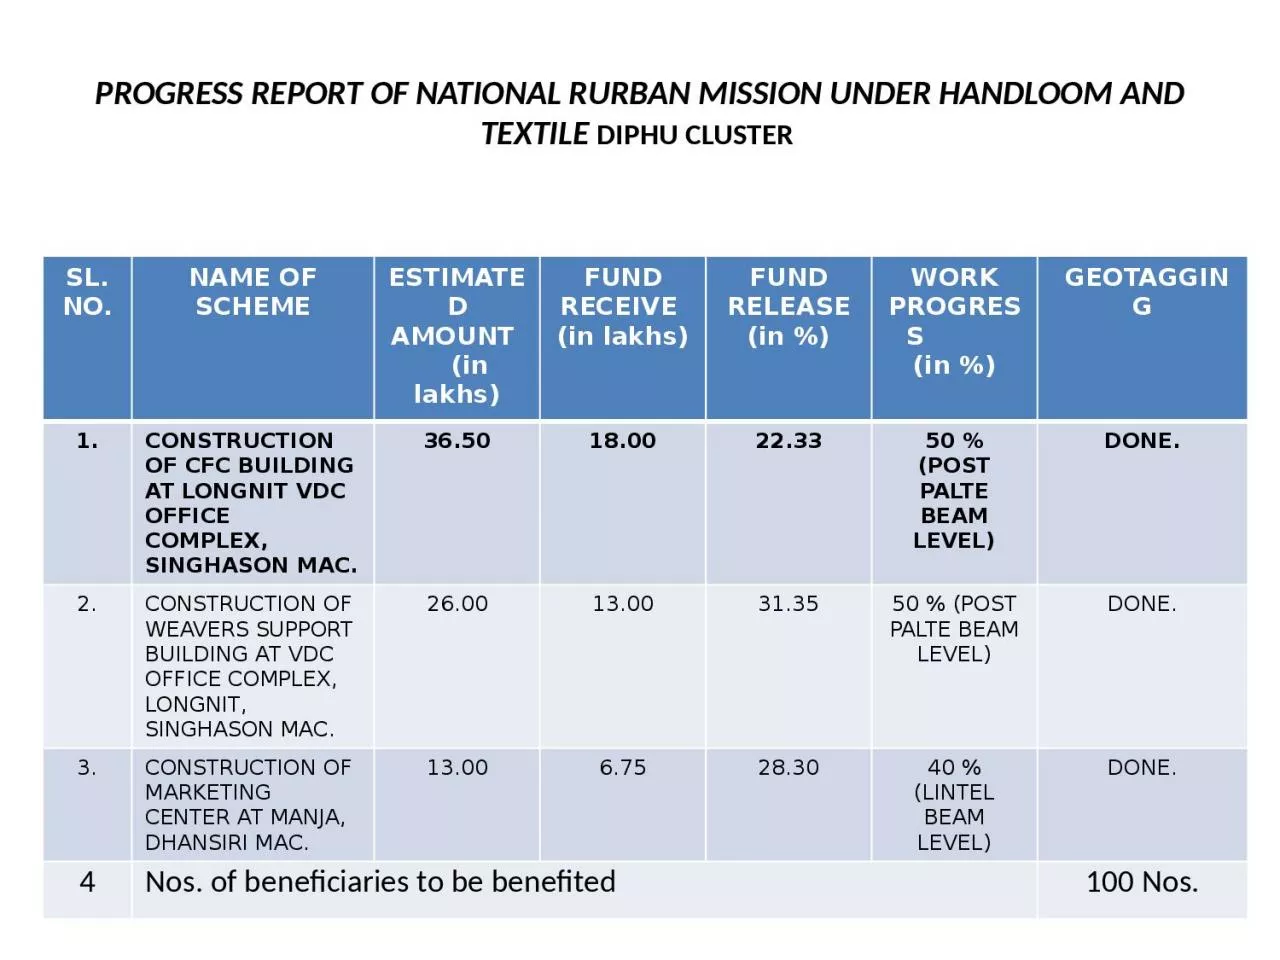 PROGRESS REPORT OF NATIONAL RURBAN MISSION UNDER HANDLOOM AND TEXTILE